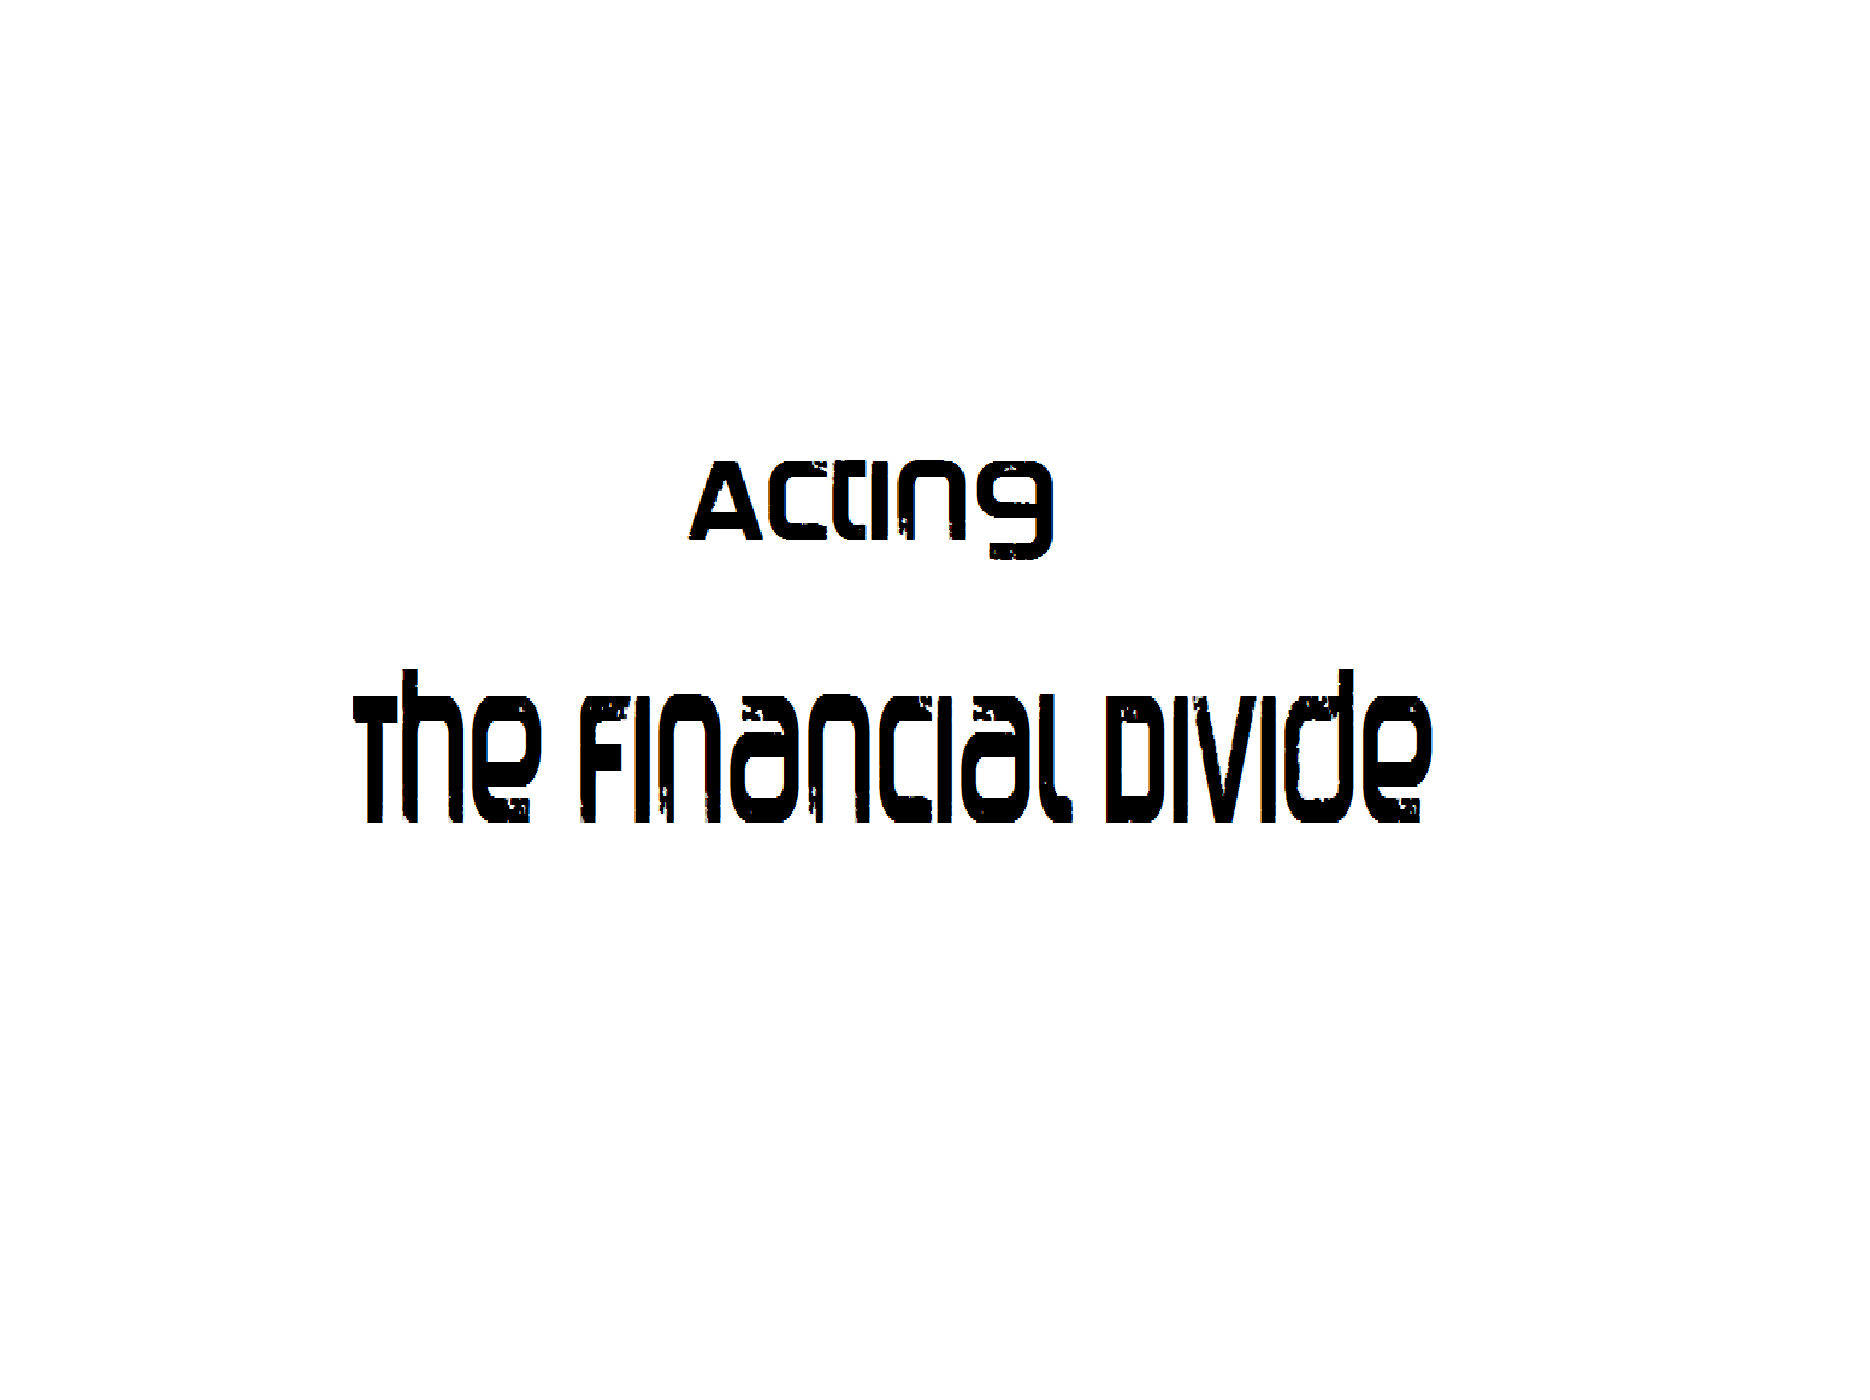 Acting - The Financial Divide